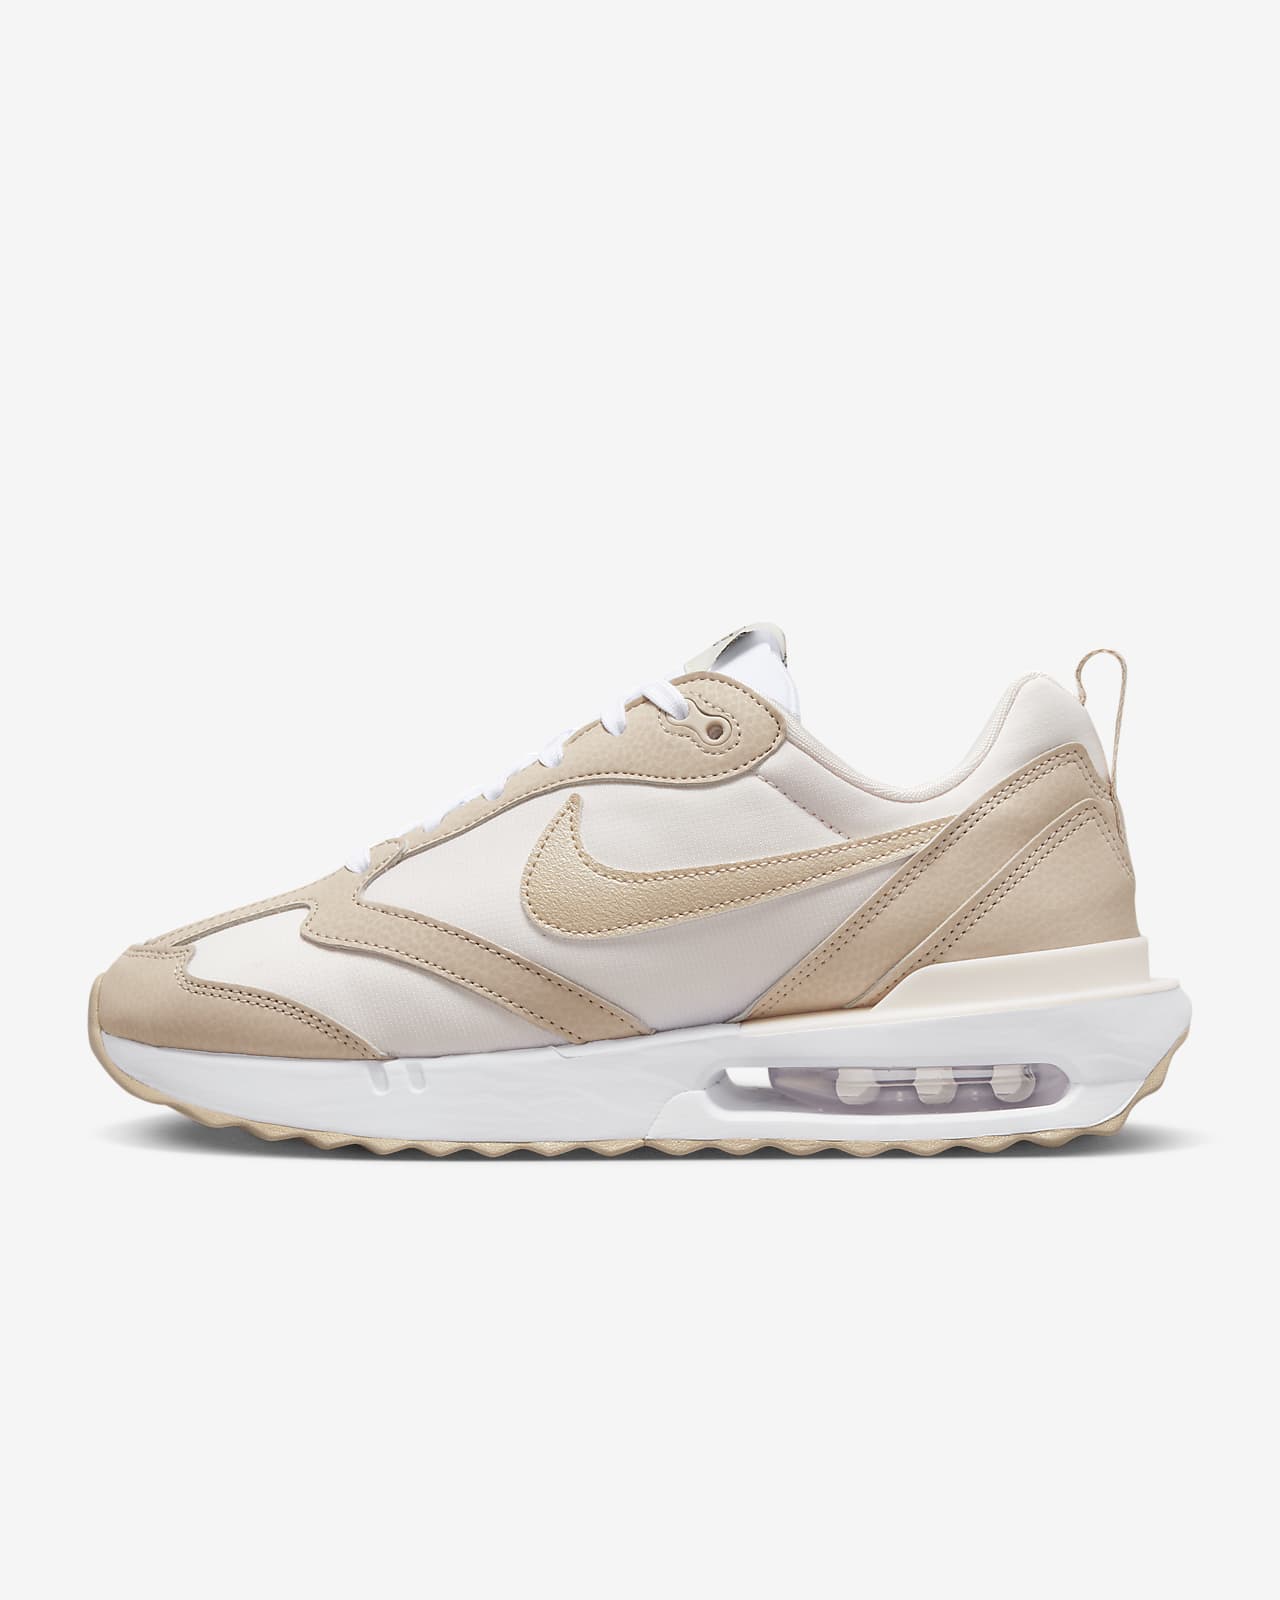 Nike Women's Air Max Dawn Shoes in White, Size: 8 | DX3717-100